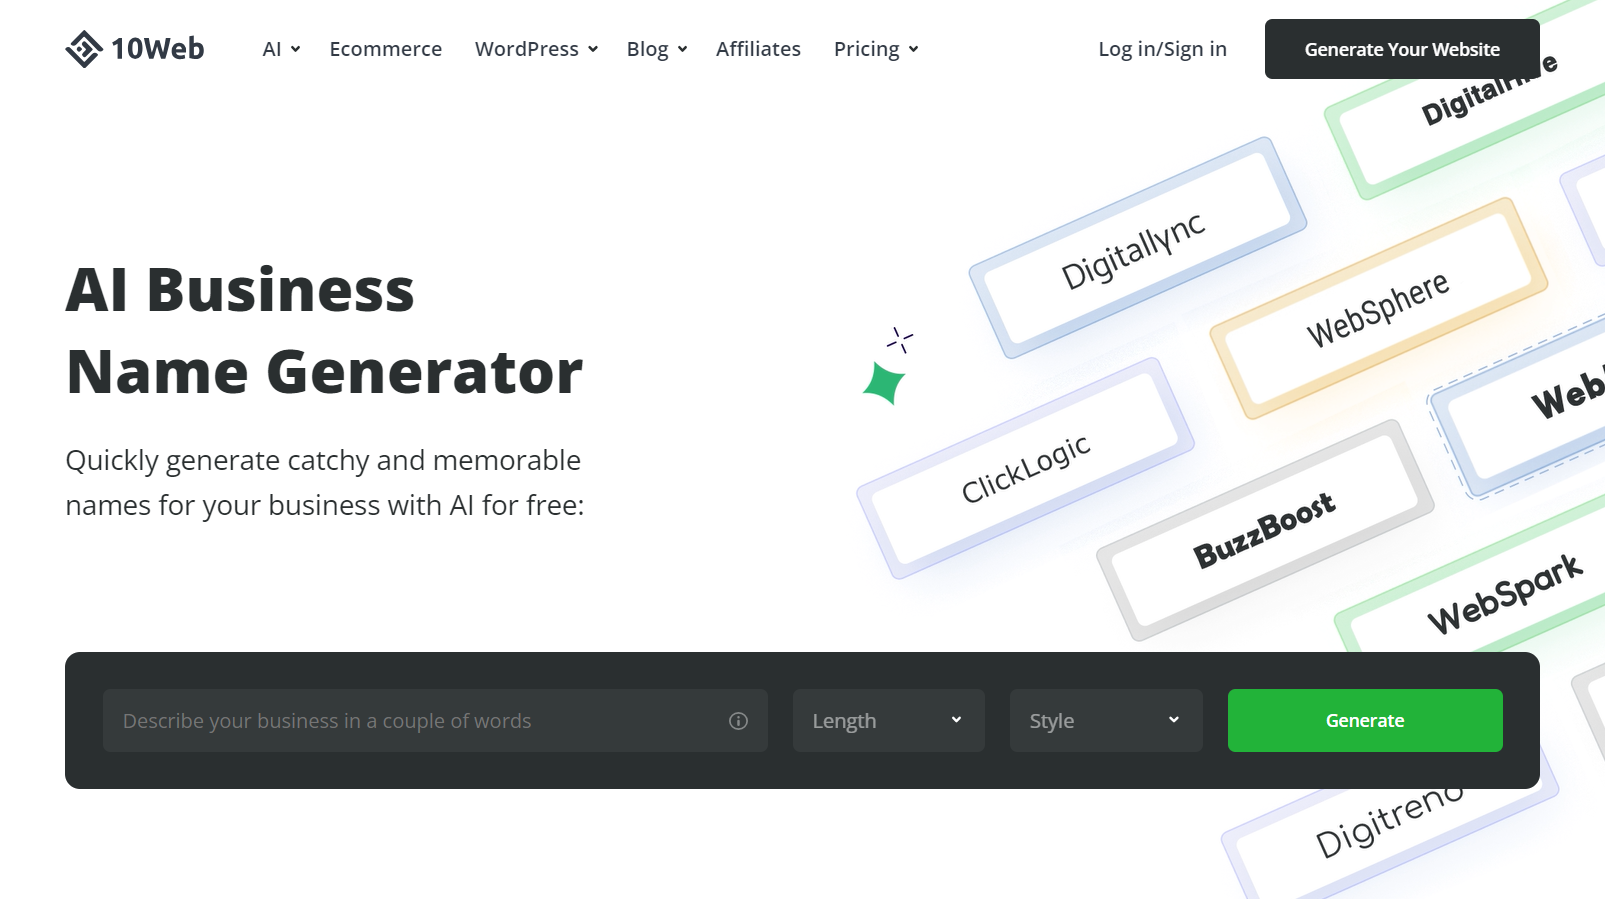 10Web Business Name Generator Page